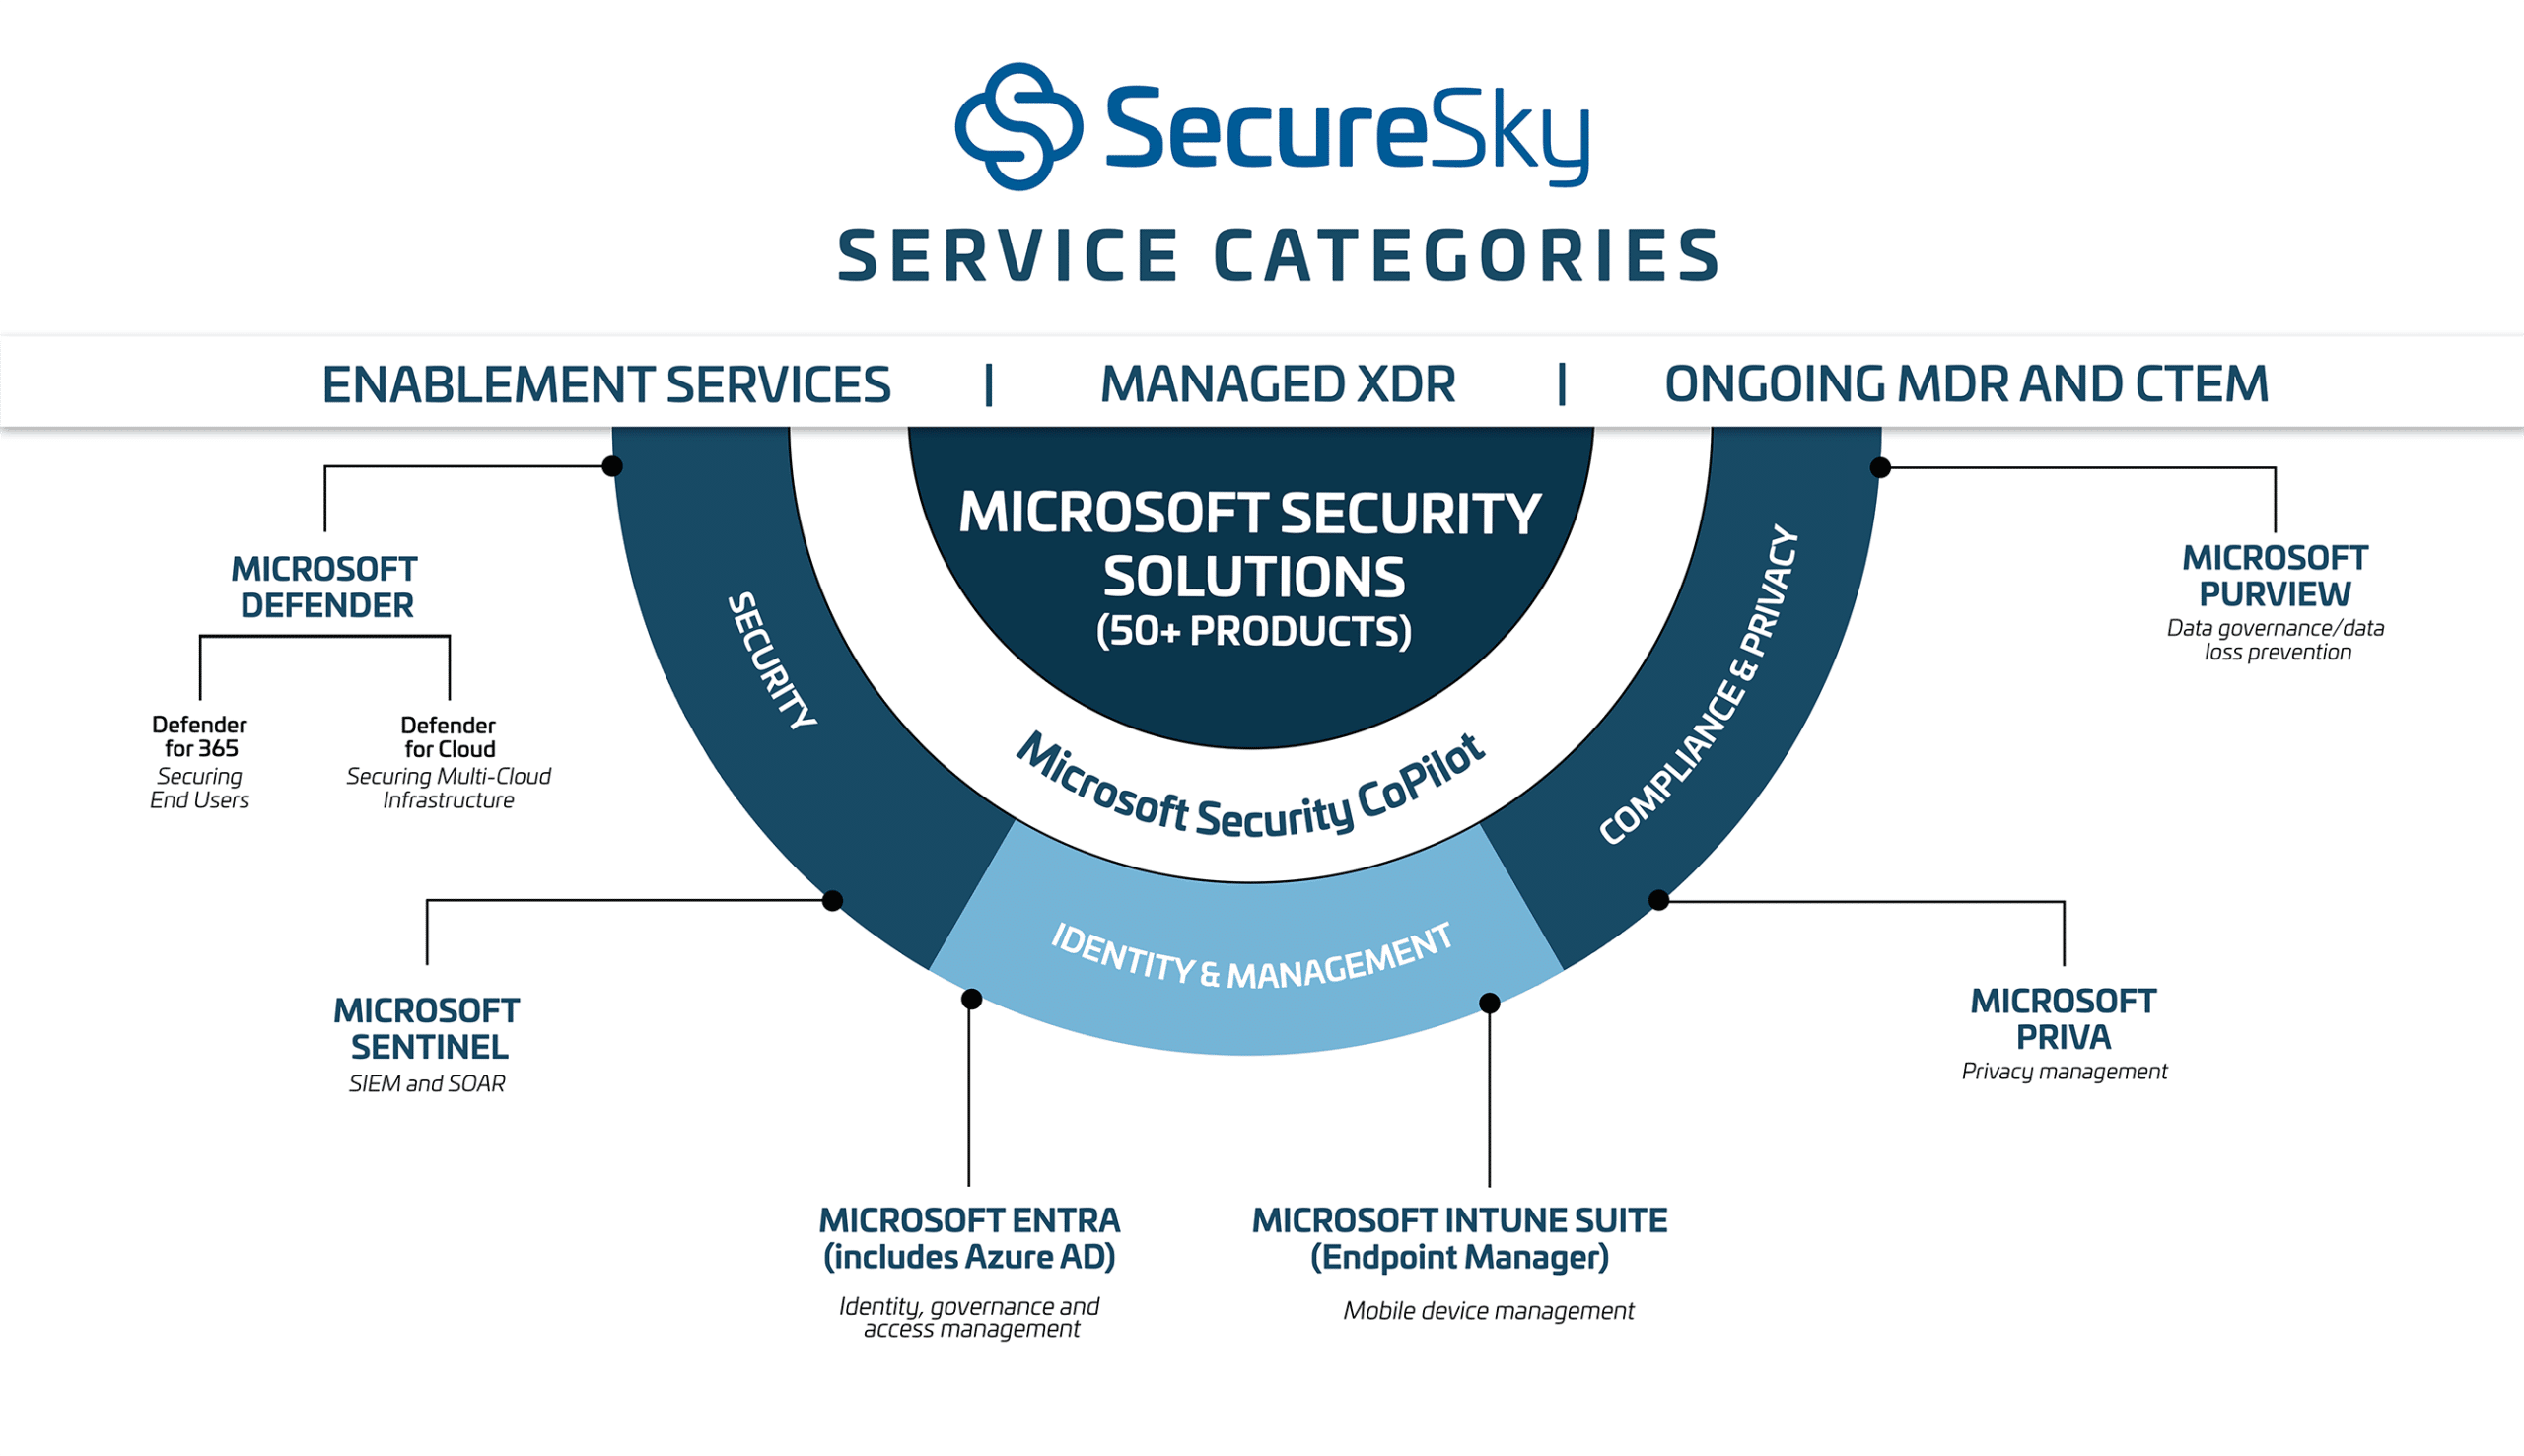 SecureSky Service Categories: Enablement Services, Managed XDR, Ongoing MDR and CTEM including Microsoft Defender, Microsoft Sentinel, Microsoft Entra (including Azure AD), Microsoft Intune Suite, Microsoft Priva, and Microsoft Purview.